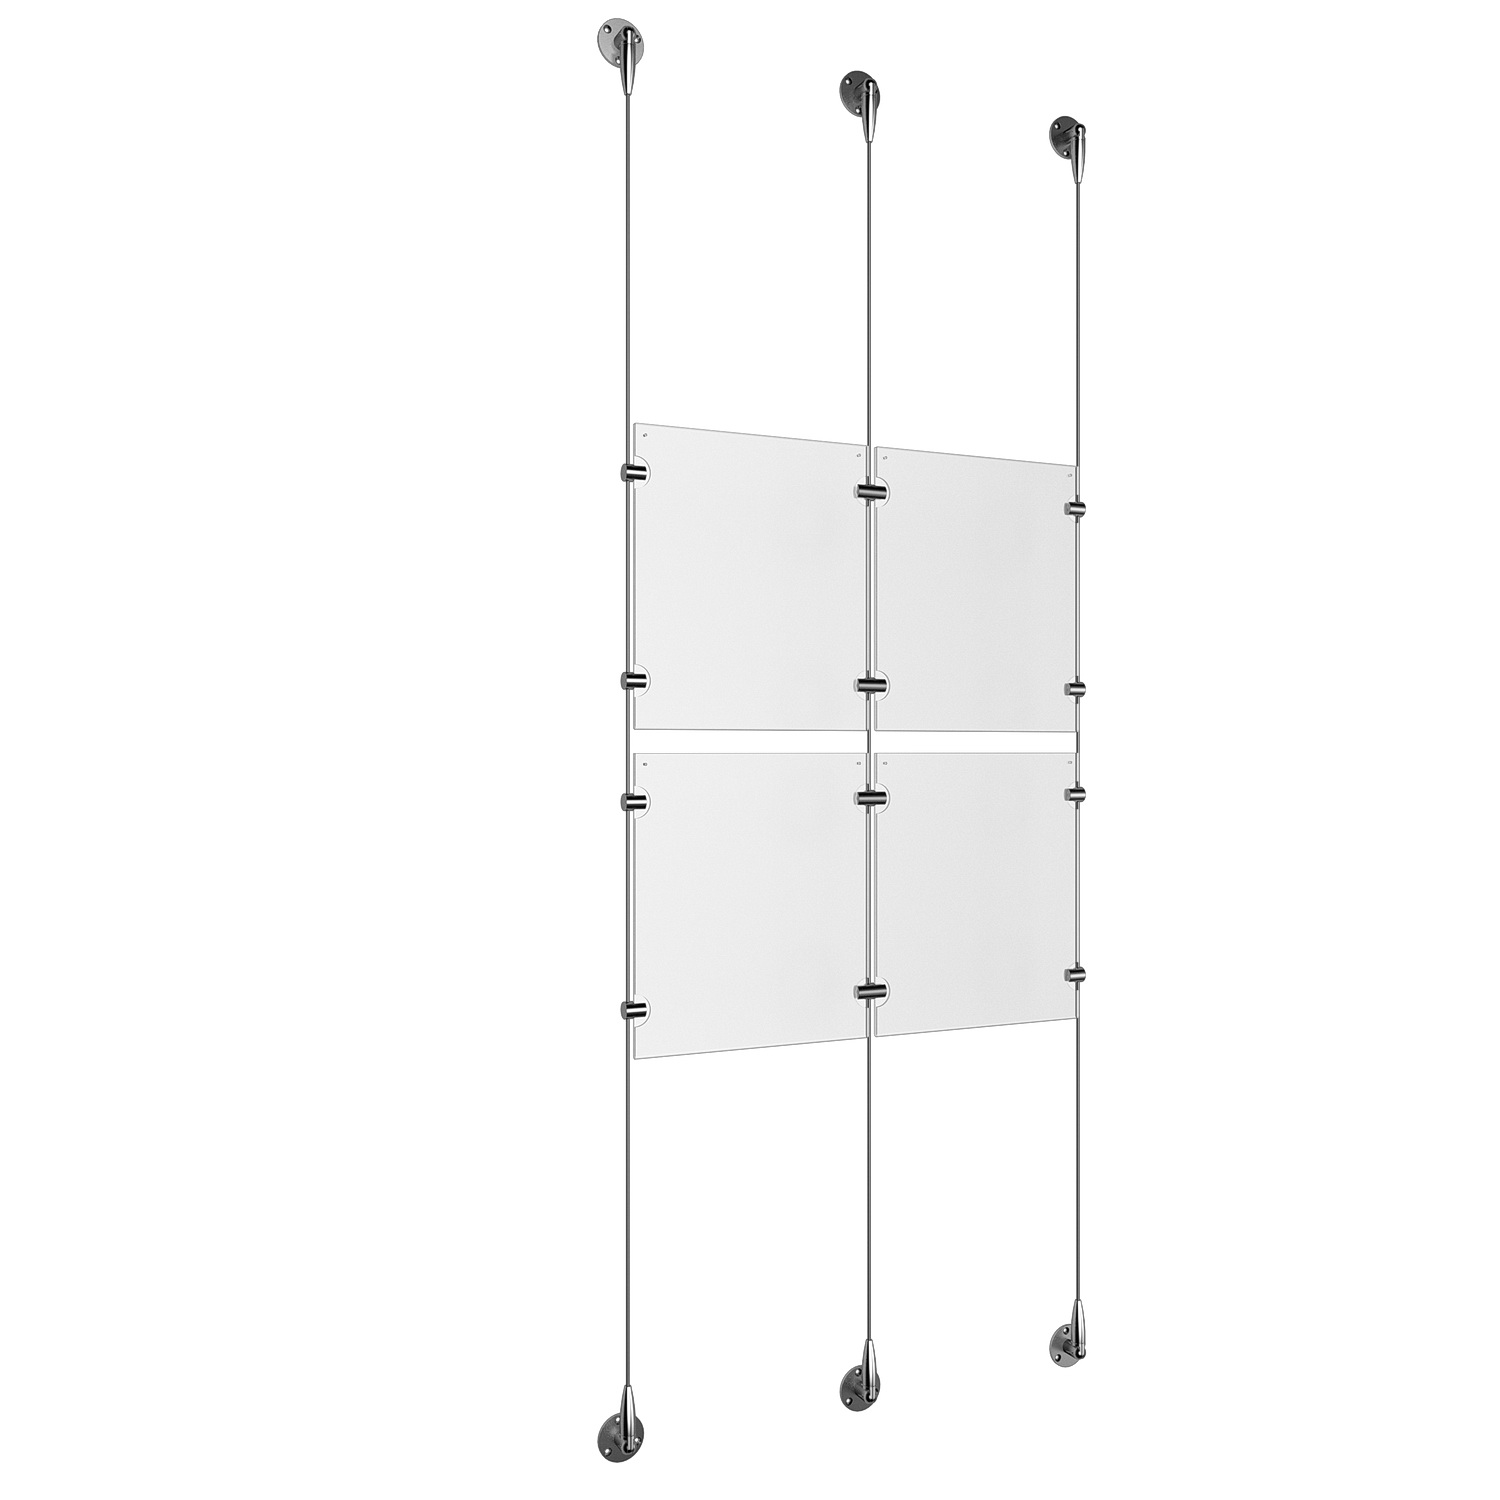 (4) 8-1/2'' Width x 11'' Height Clear Acrylic Frame & (3) Stainless Steel Satin Brushed Adjustable Angle Signature 1/8'' Cable Systems with (8) Single-Sided Panel Grippers (4) Double-Sided Panel Grippers